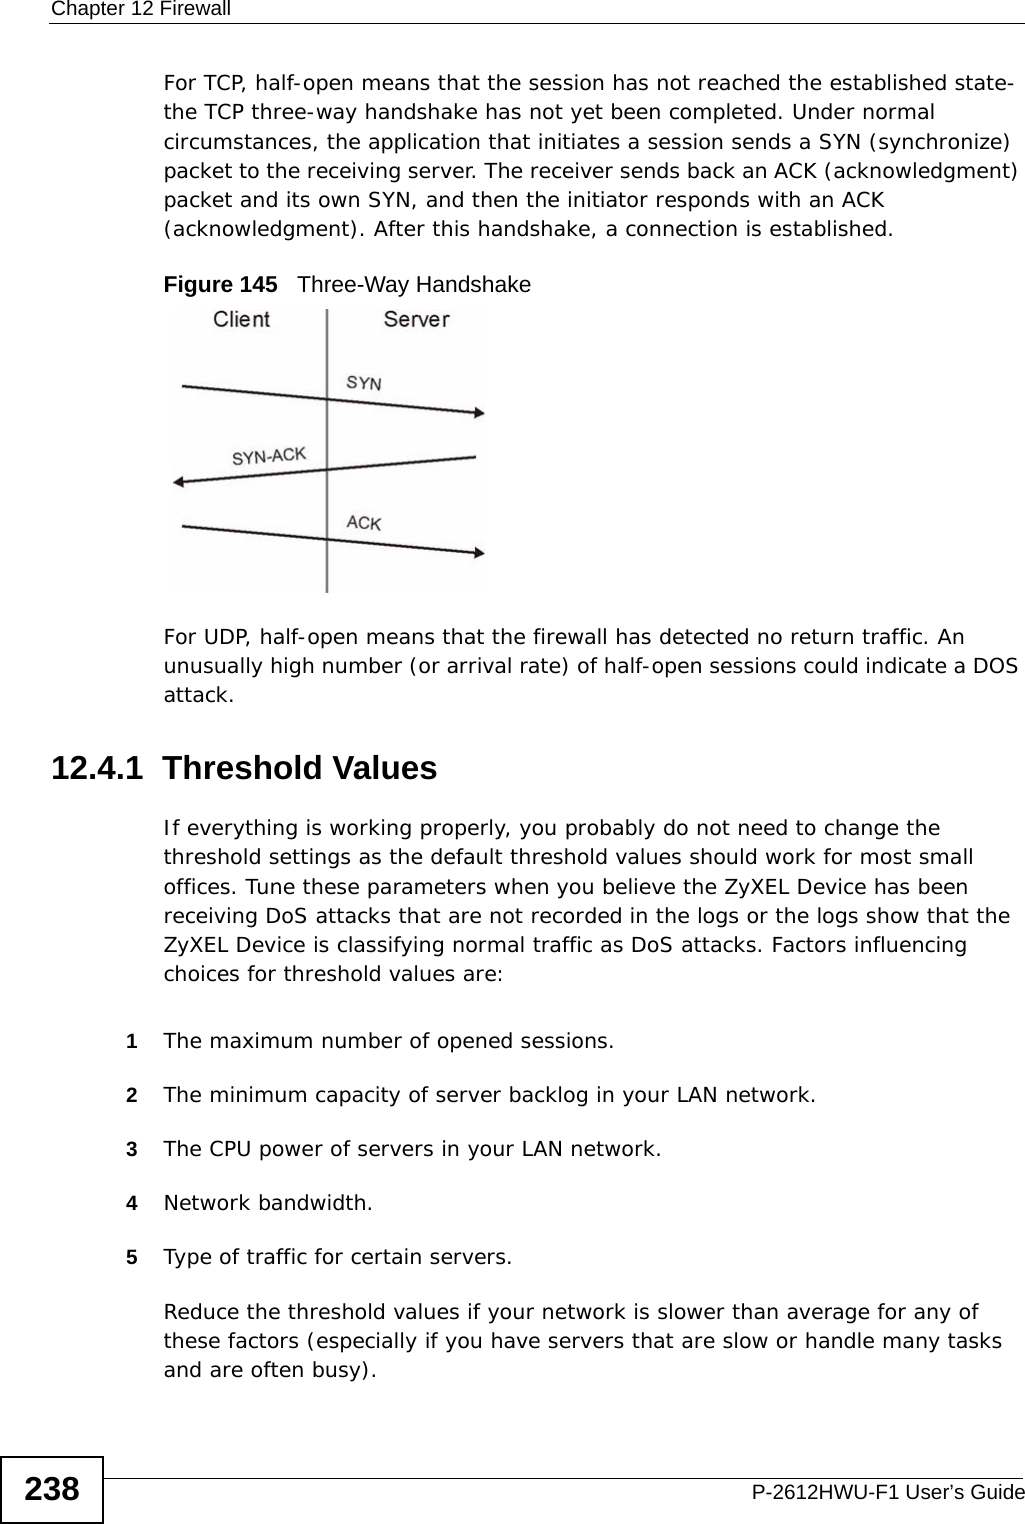 Chapter 12 FirewallP-2612HWU-F1 User’s Guide238For TCP, half-open means that the session has not reached the established state-the TCP three-way handshake has not yet been completed. Under normal circumstances, the application that initiates a session sends a SYN (synchronize) packet to the receiving server. The receiver sends back an ACK (acknowledgment) packet and its own SYN, and then the initiator responds with an ACK (acknowledgment). After this handshake, a connection is established. Figure 145   Three-Way HandshakeFor UDP, half-open means that the firewall has detected no return traffic. An unusually high number (or arrival rate) of half-open sessions could indicate a DOS attack. 12.4.1  Threshold ValuesIf everything is working properly, you probably do not need to change the threshold settings as the default threshold values should work for most small offices. Tune these parameters when you believe the ZyXEL Device has been receiving DoS attacks that are not recorded in the logs or the logs show that the ZyXEL Device is classifying normal traffic as DoS attacks. Factors influencing choices for threshold values are:1The maximum number of opened sessions.2The minimum capacity of server backlog in your LAN network.3The CPU power of servers in your LAN network.4Network bandwidth. 5Type of traffic for certain servers.Reduce the threshold values if your network is slower than average for any of these factors (especially if you have servers that are slow or handle many tasks and are often busy). 